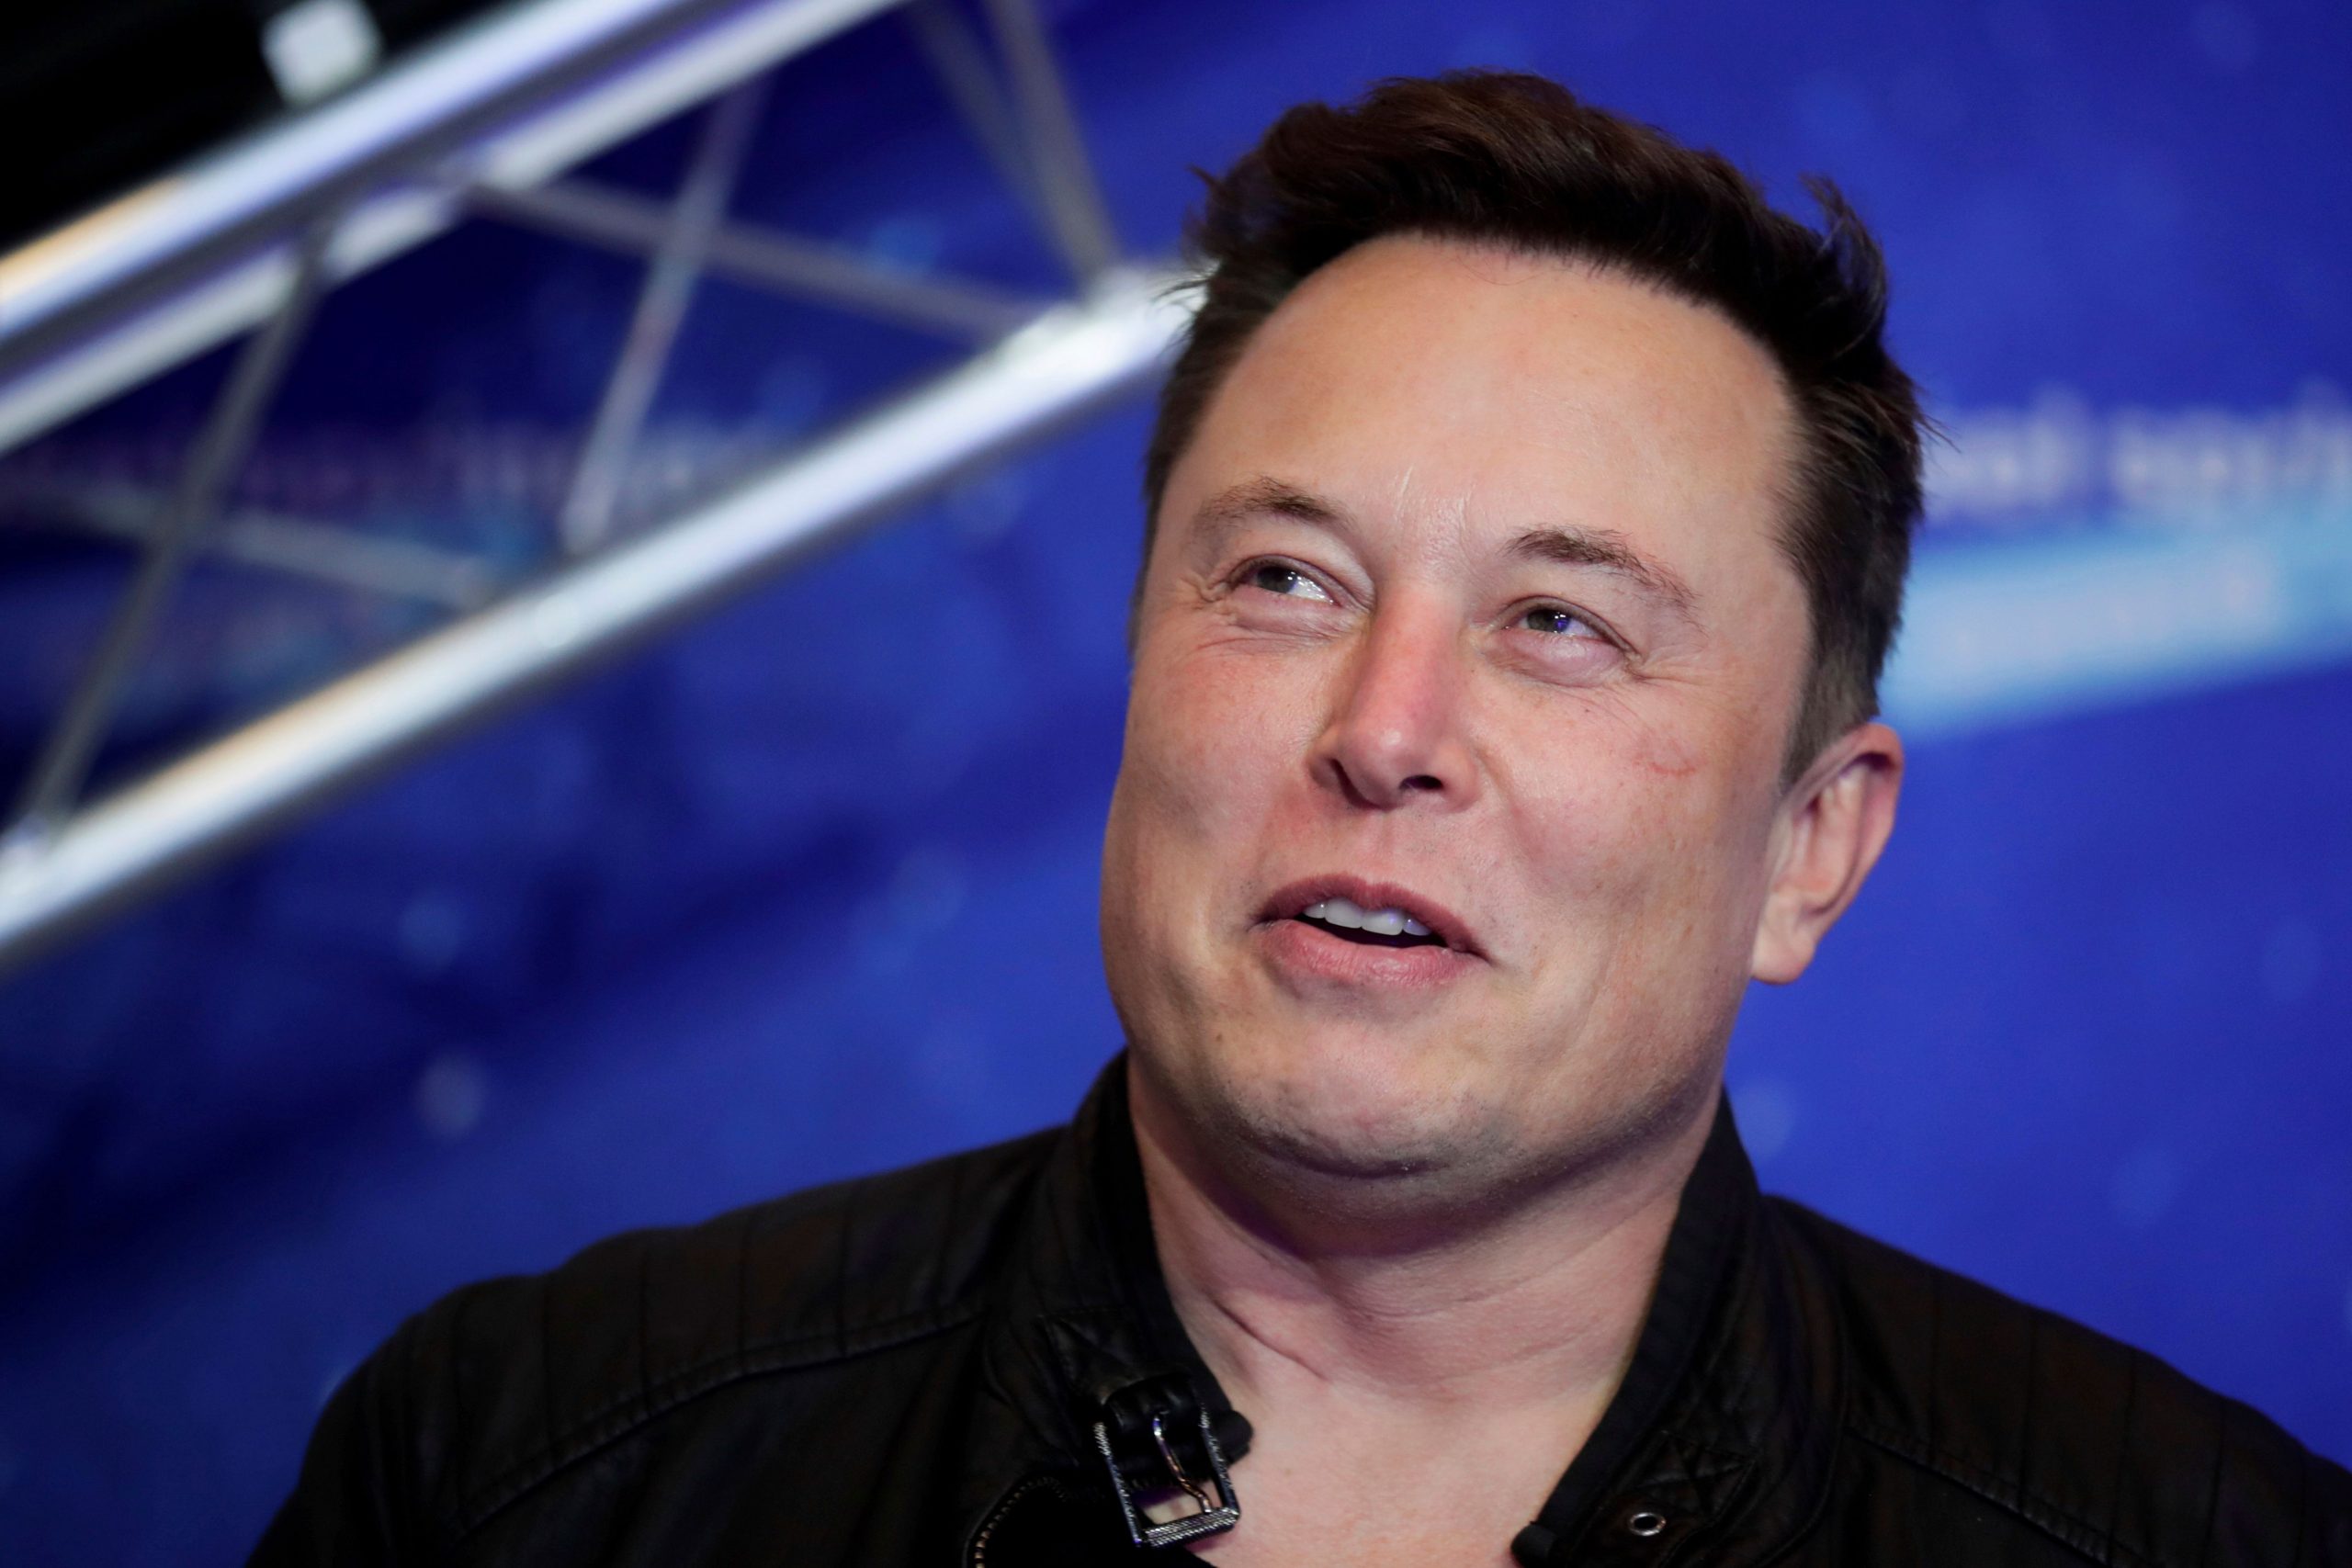 Elon Musk relationships: All wives, girlfriends, and alleged affairs